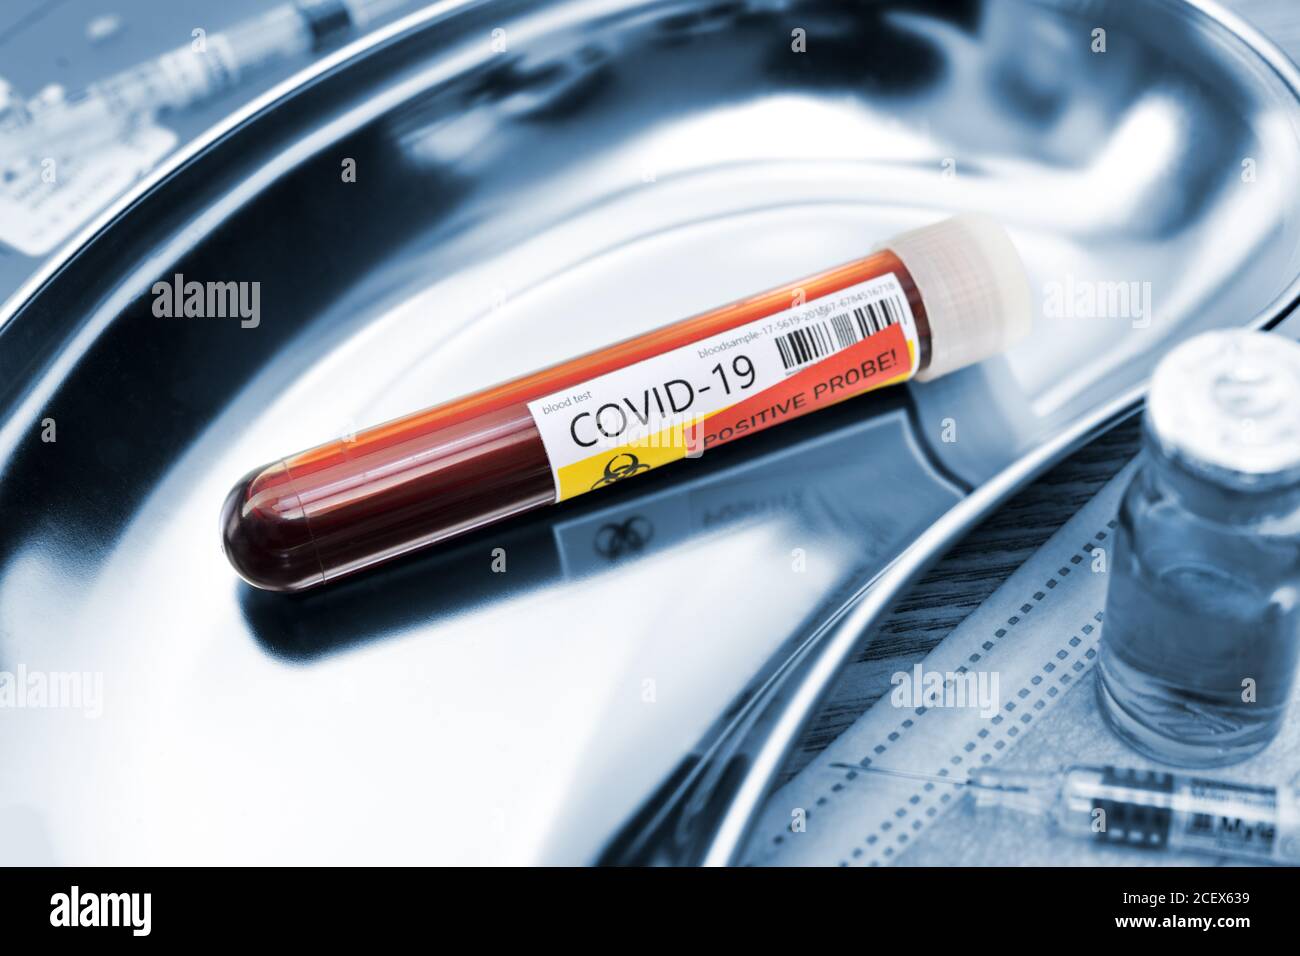 COVID-19 blood collection in a kidney dish, corona vaccination Stock Photo